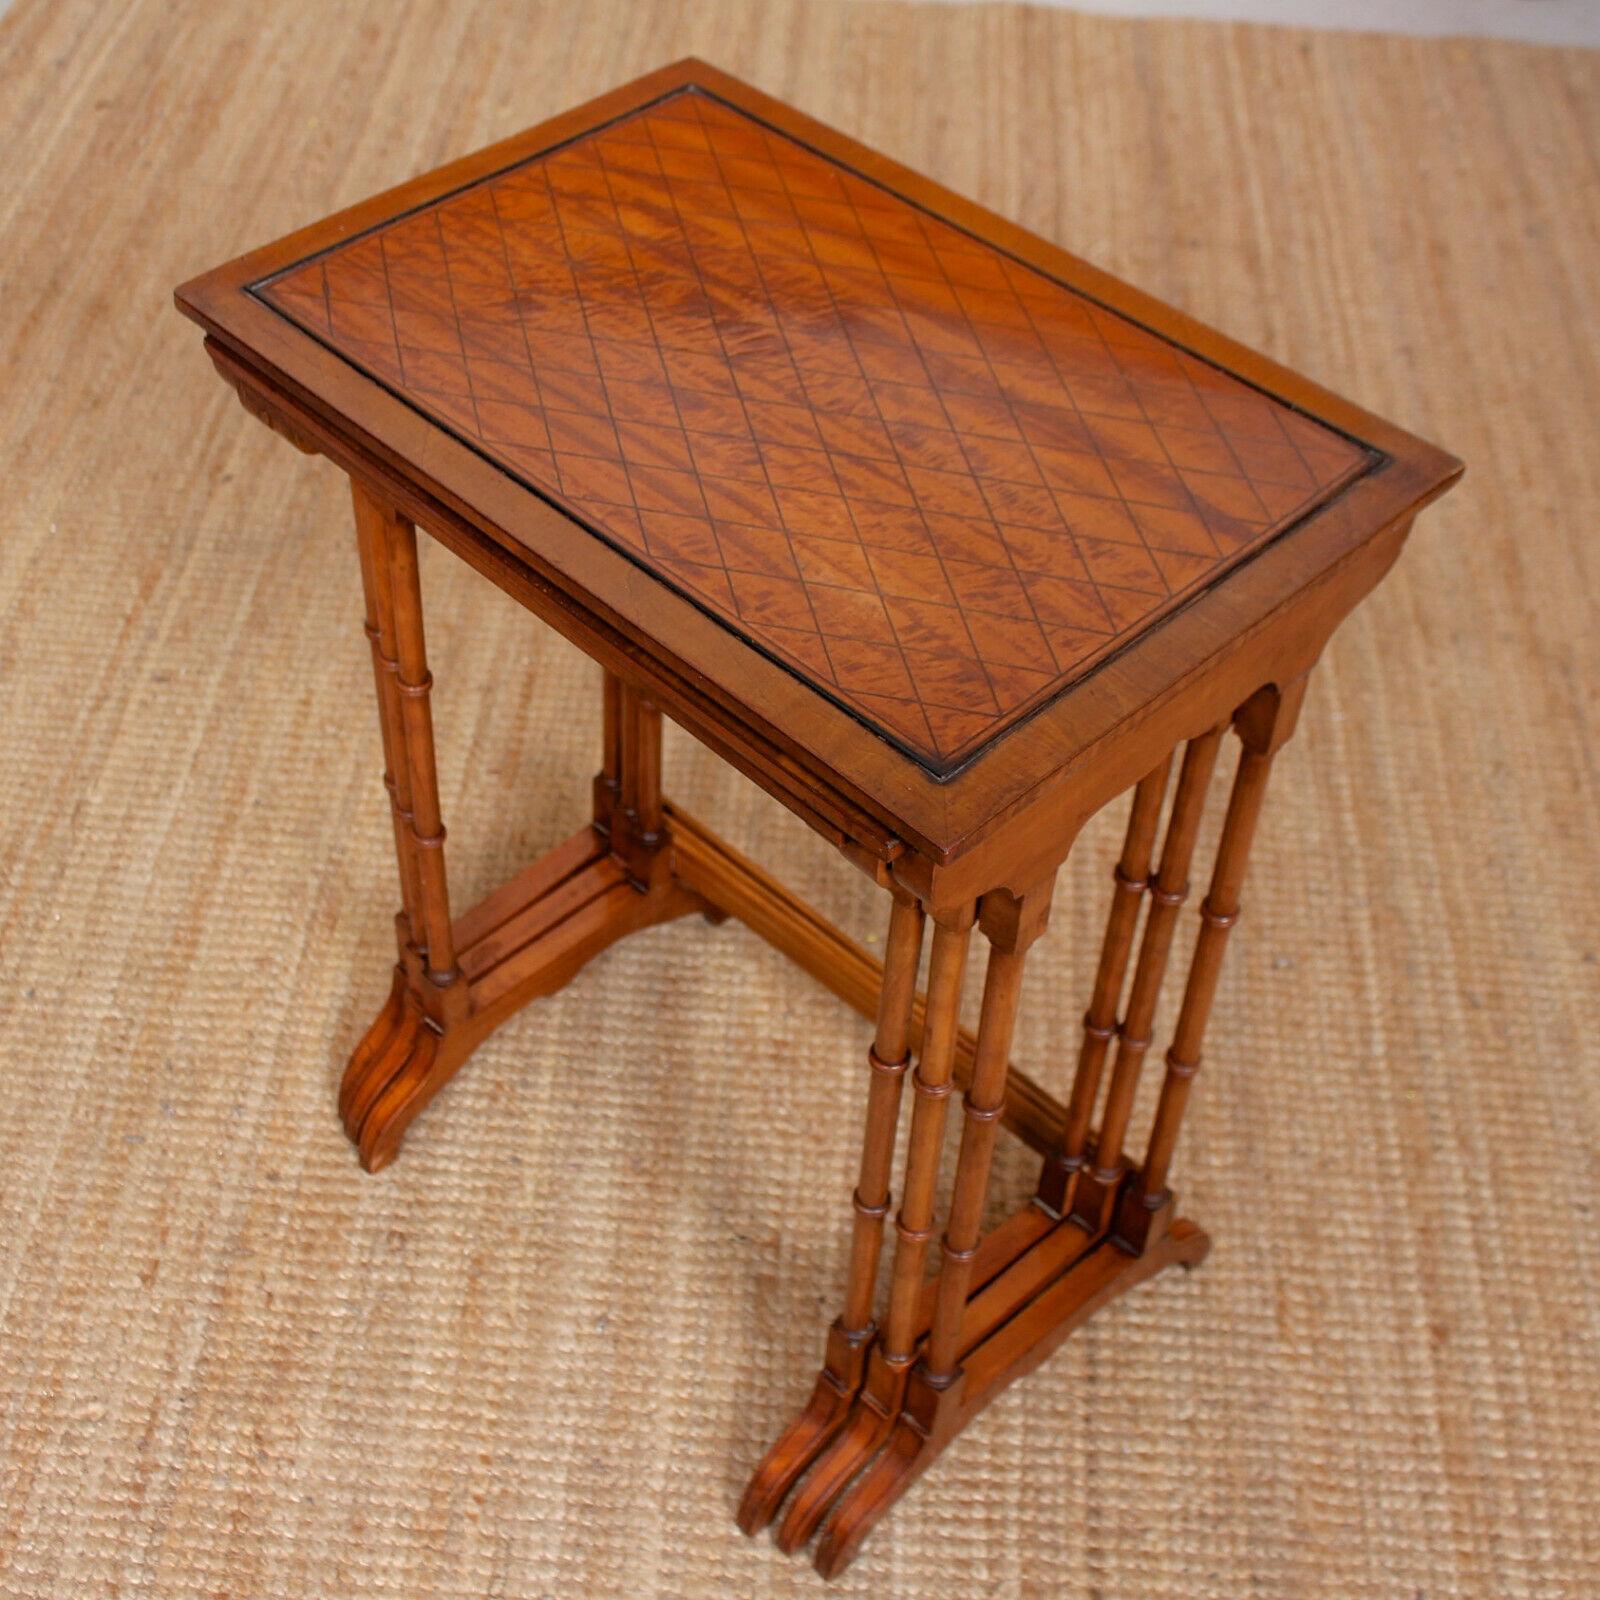 English Nest of Tables Satinwood Crossbanded 3 Side Tables Tall Georgian For Sale 2